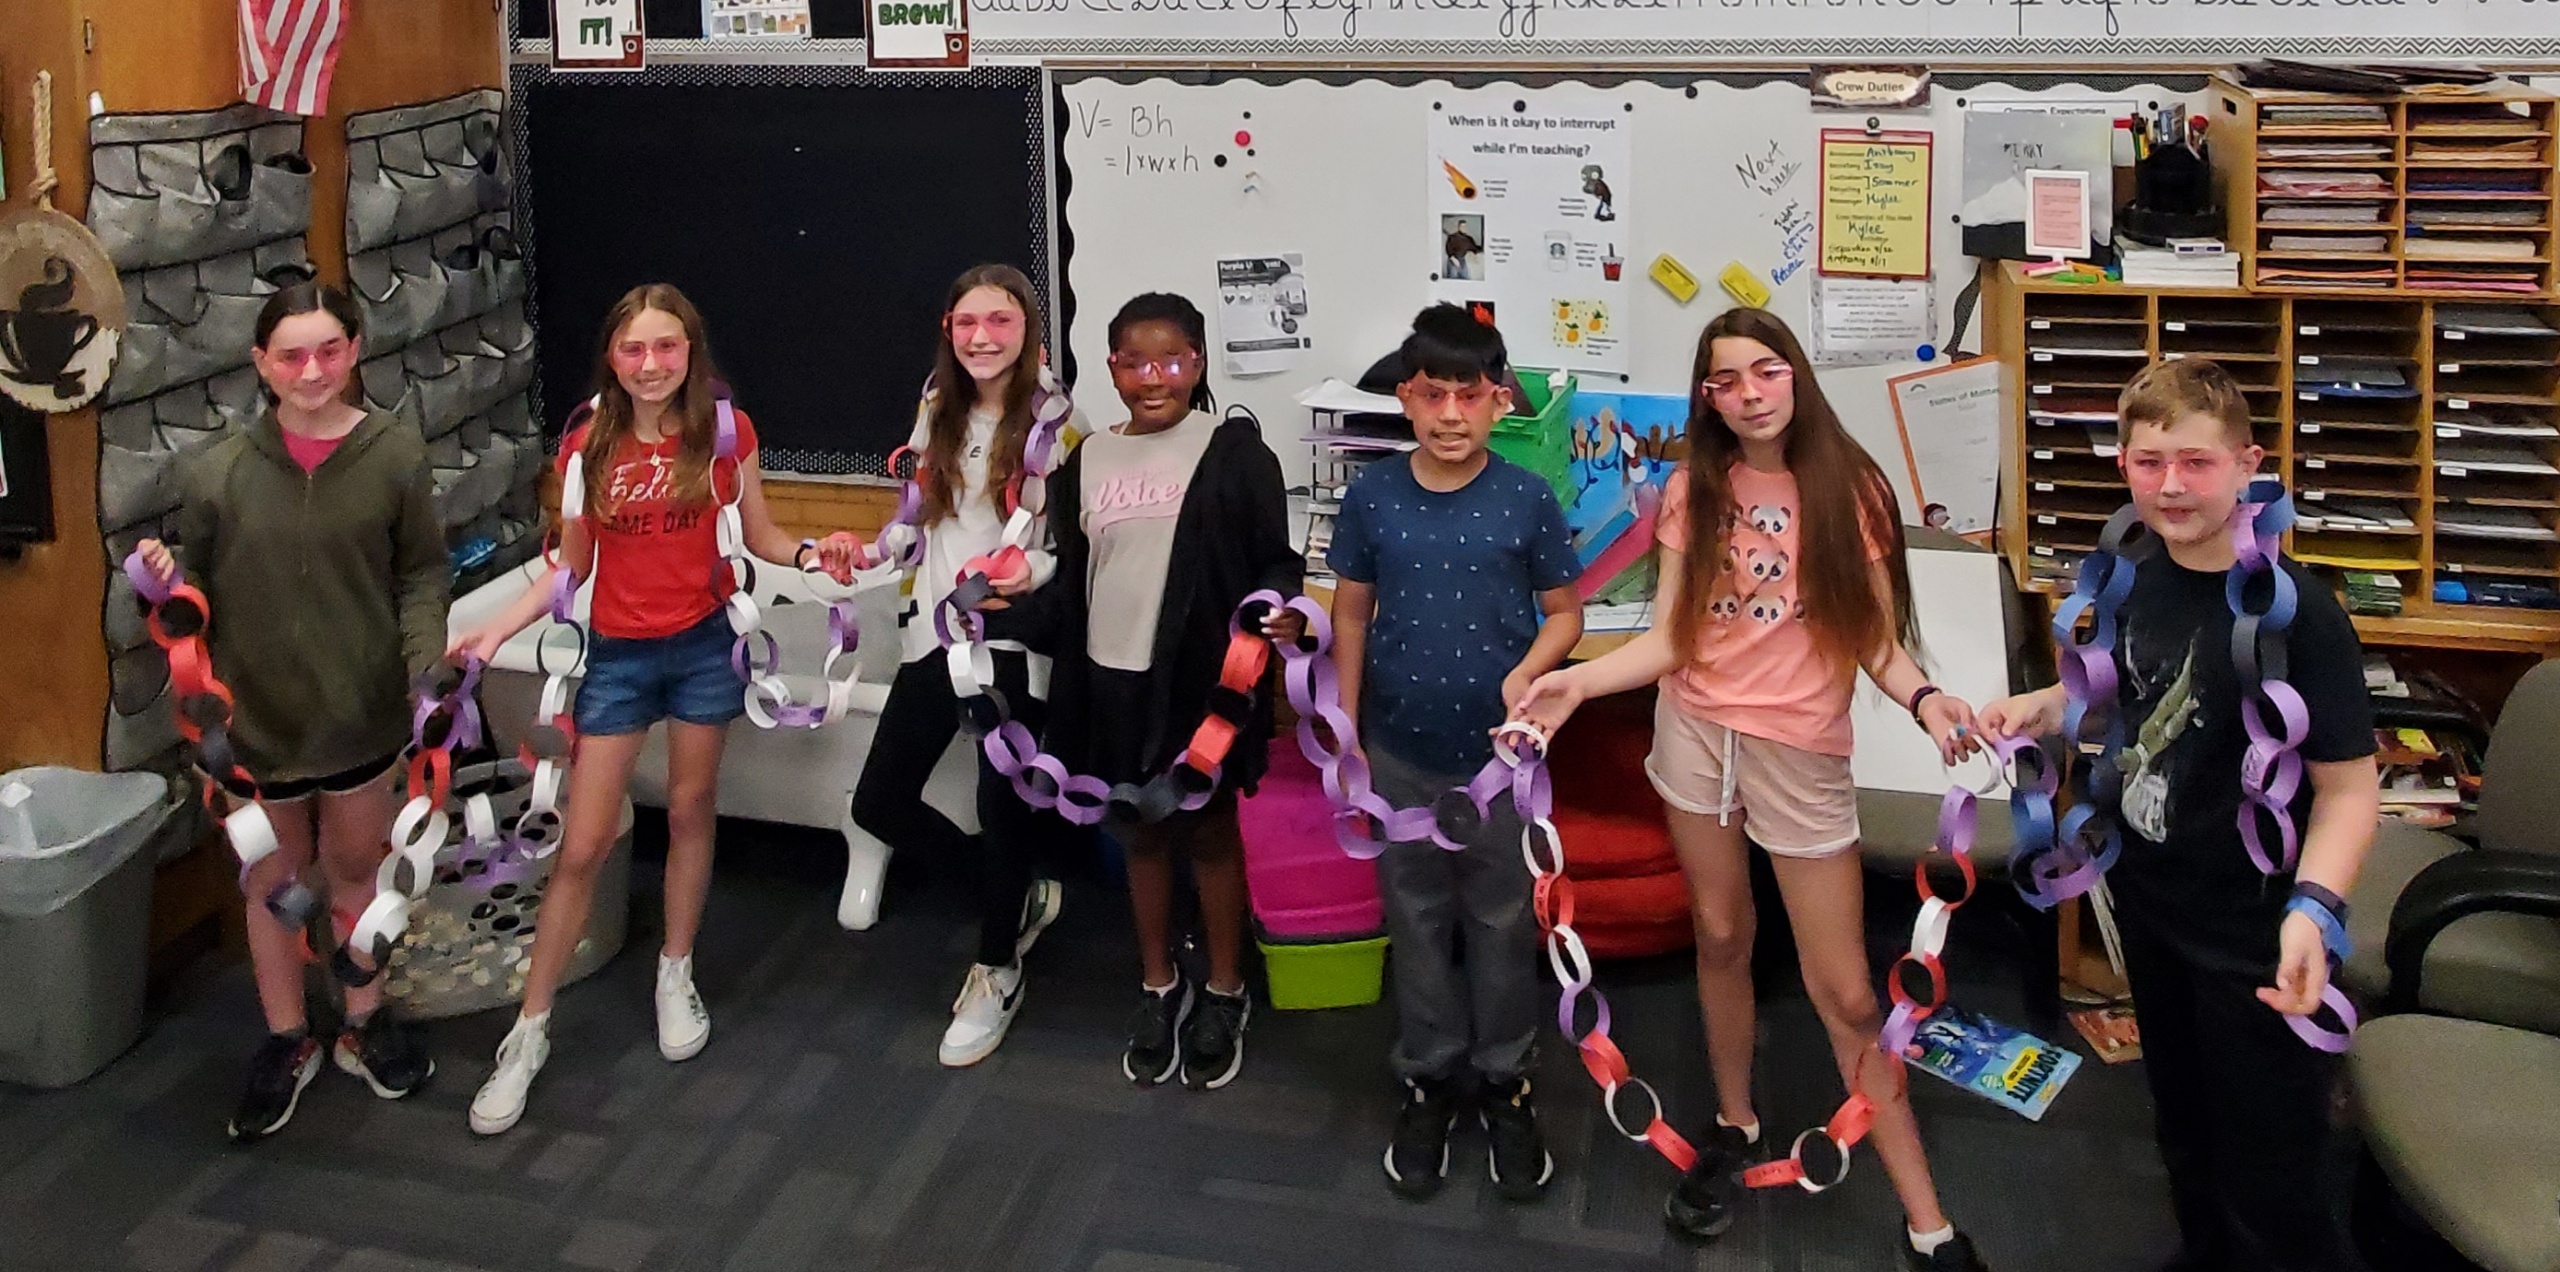 Hope Squad Project was to help the school create chains of positivity